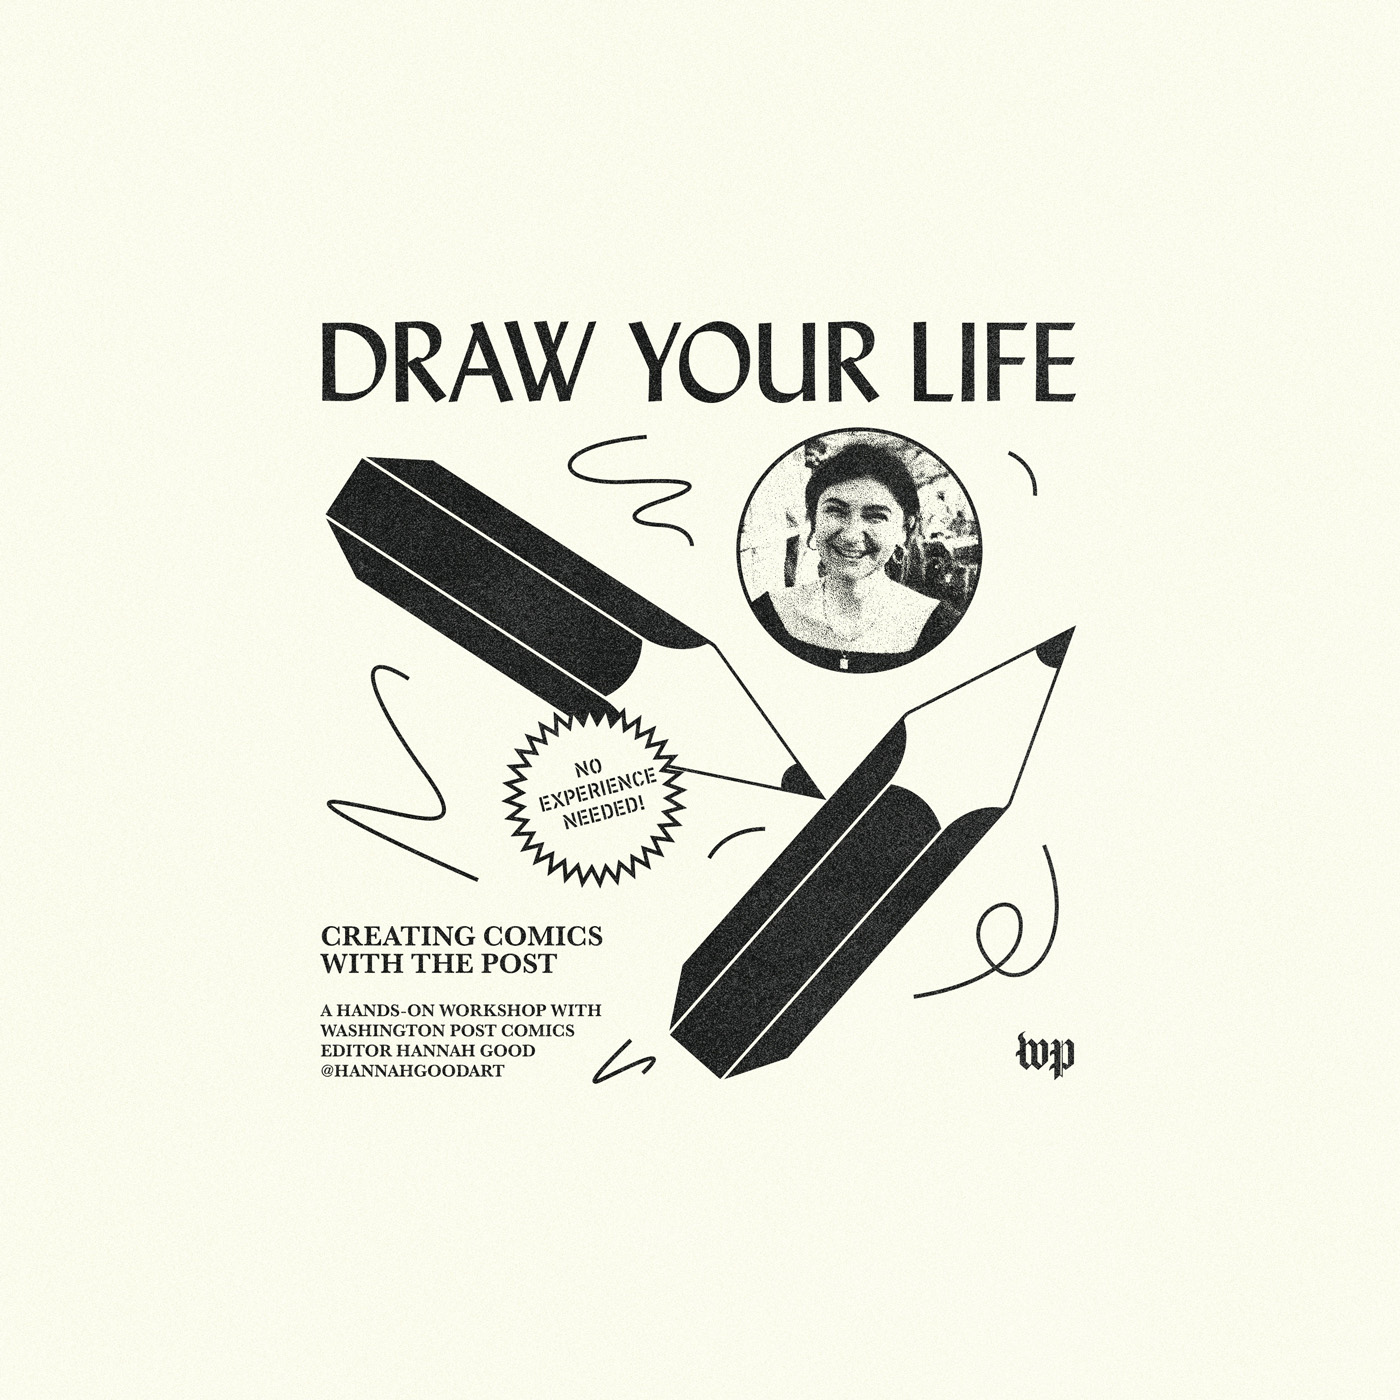 Draw Your Life at the LINE Austin